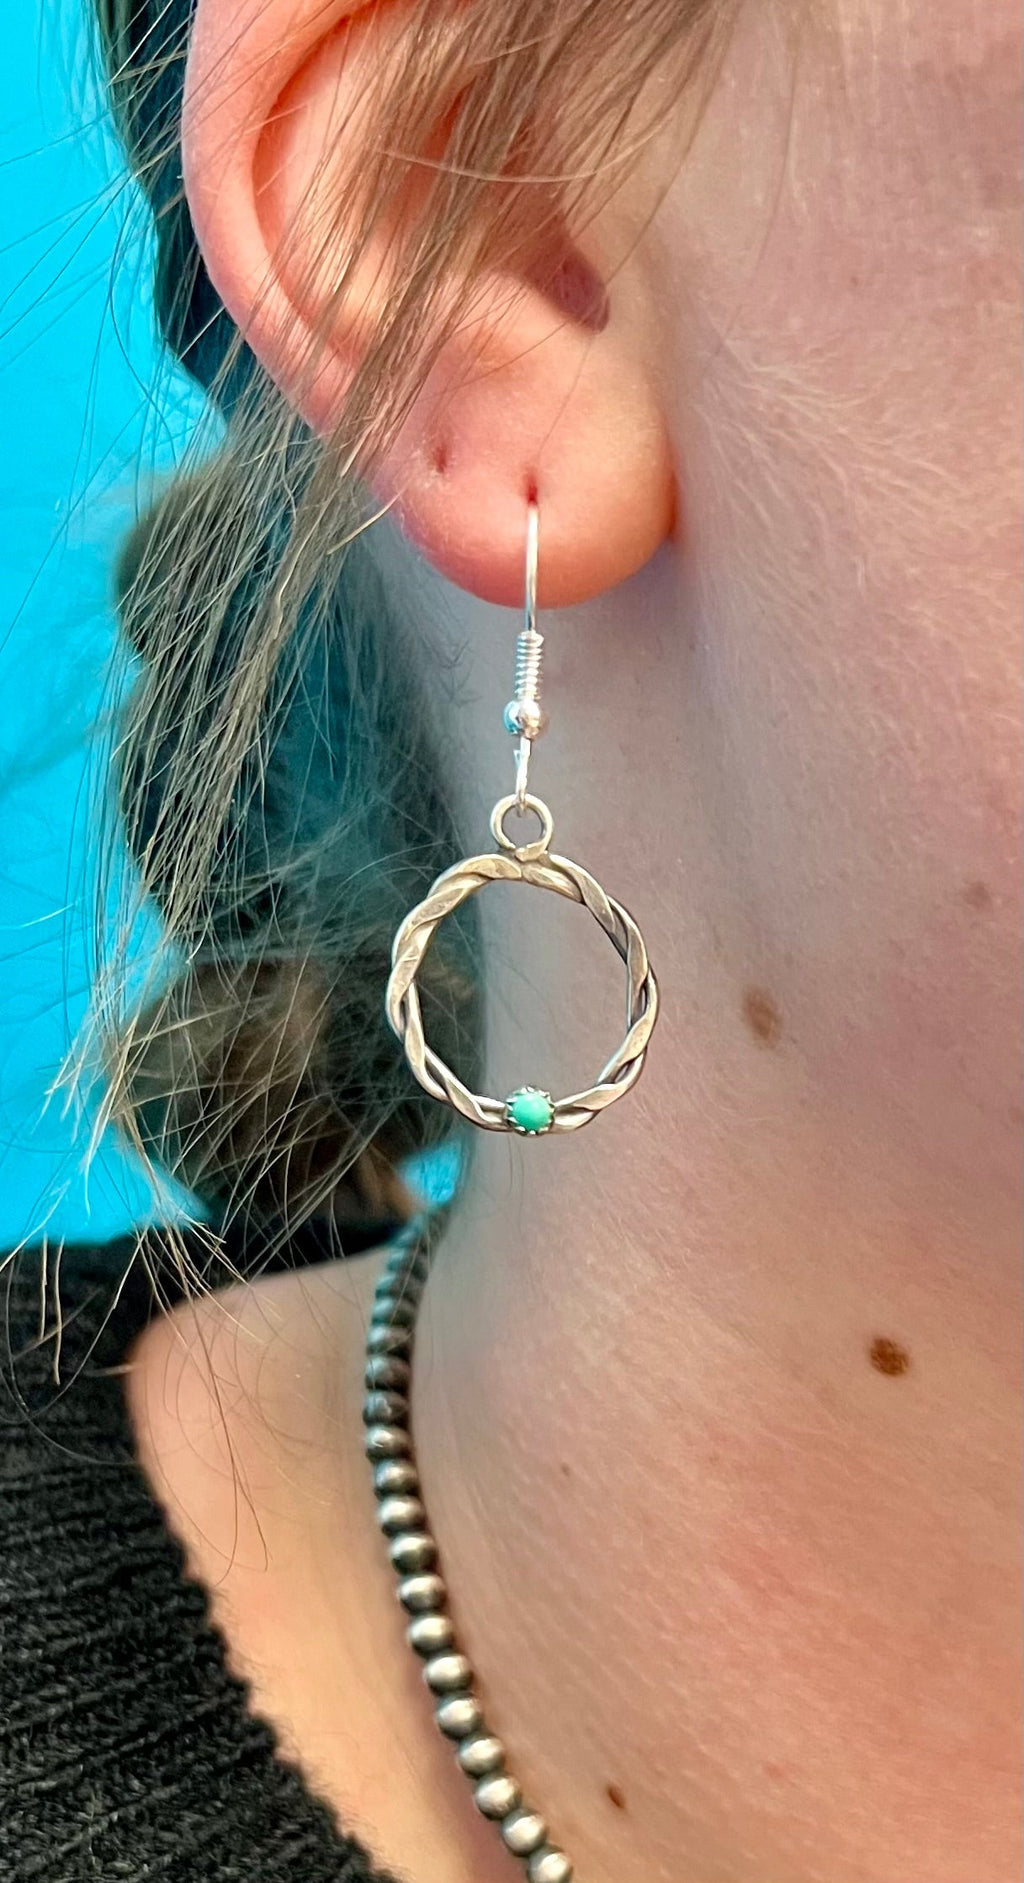 "Add a dash of Southwest charm to your style with Ropin' In Gallup Navajo Earrings. Crafted with authentic sterling silver and genuine turquoise stone, these earrings feature a unique twisted rope design and a classic fish hook for a playful dangle. Get ready to rock your outfits with this eye-catching accessory!"